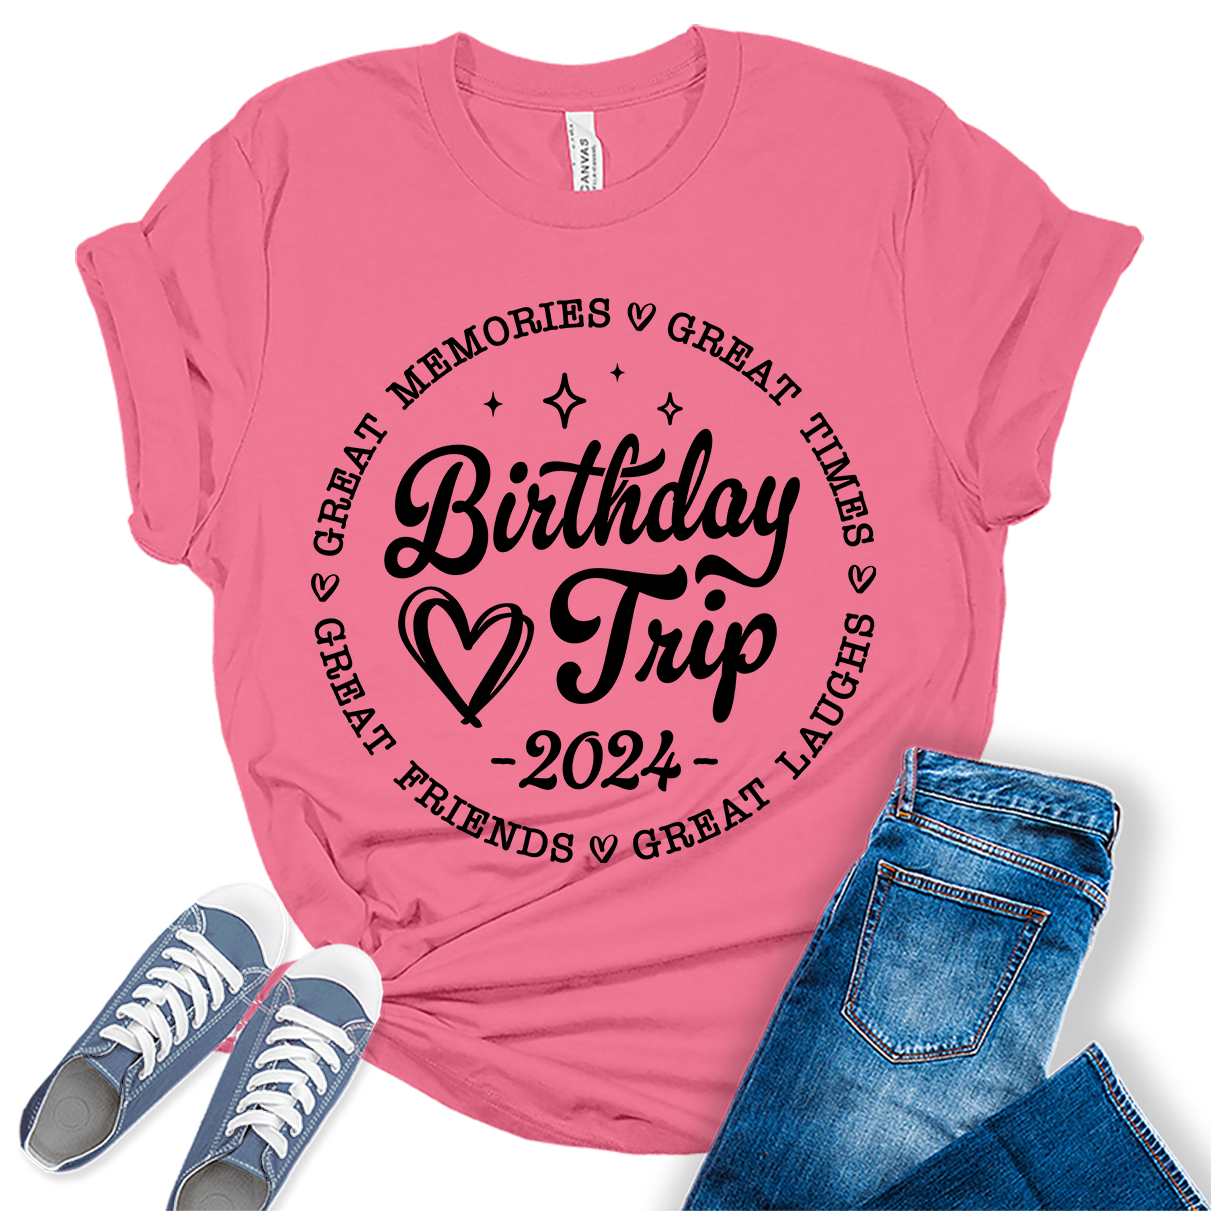 Birthday Trip Shirt 2024 Cute Party Shirts for Women Trendy Letter Print Graphic Tees